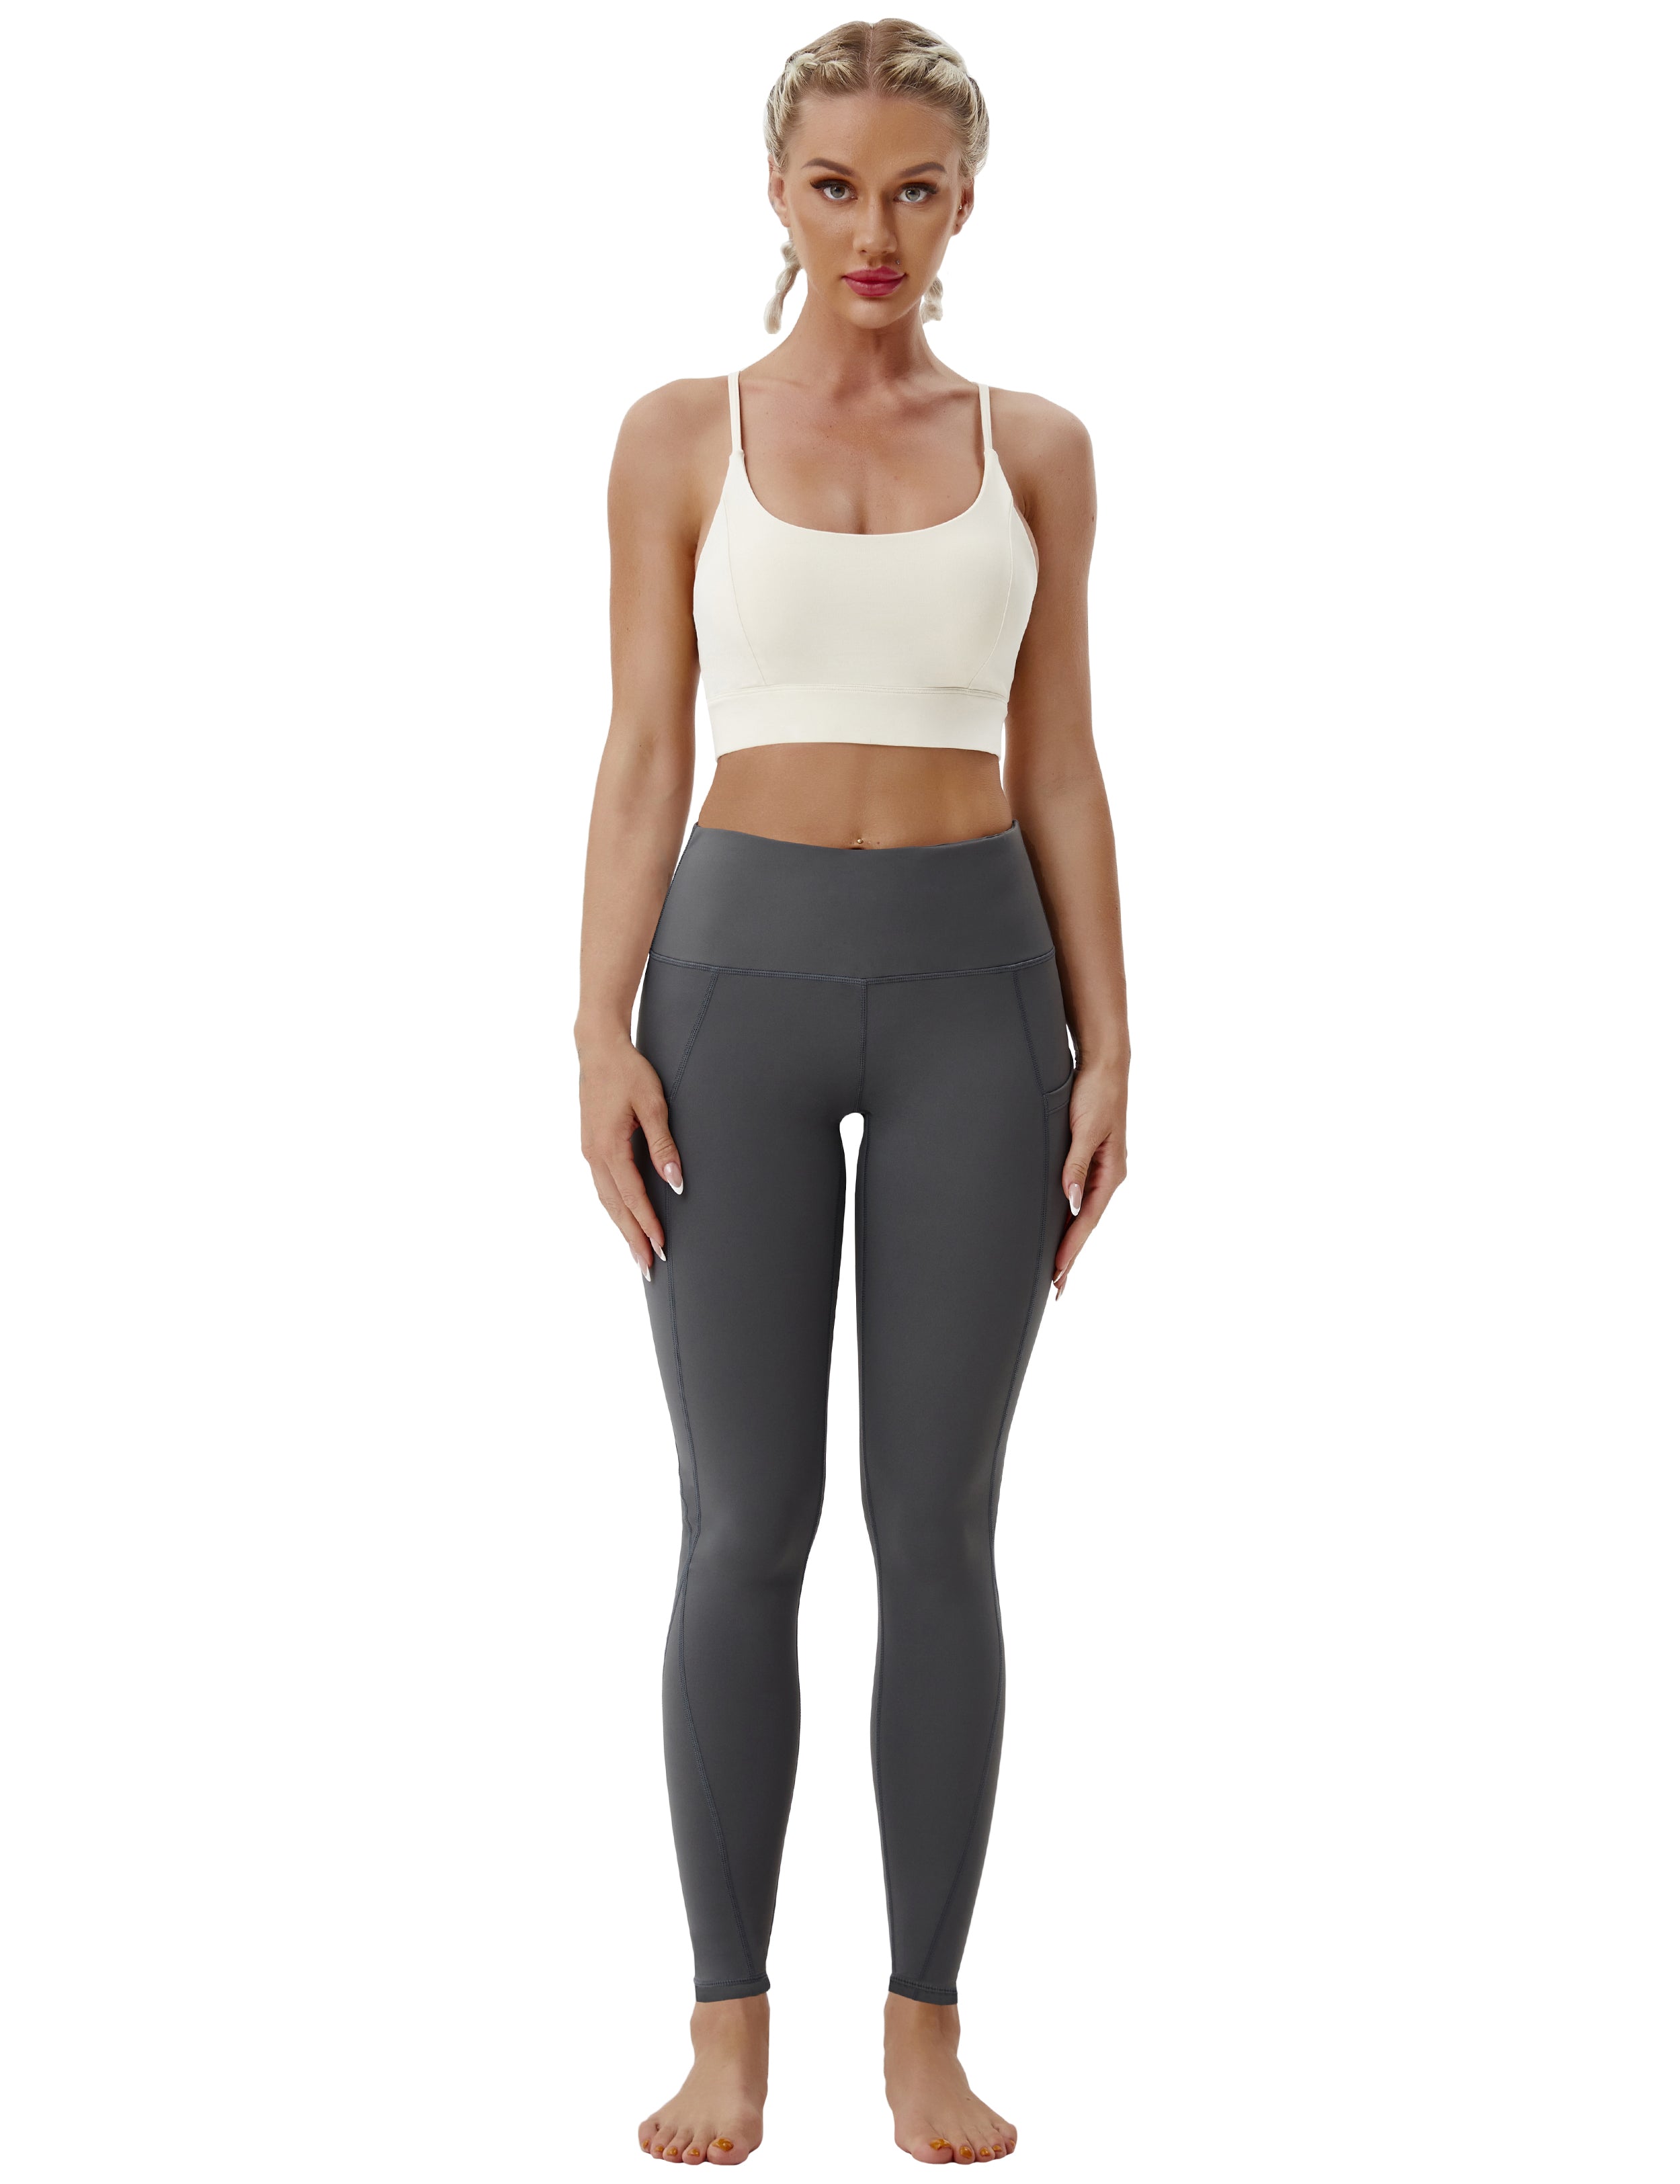 High Waist Side Pockets Pilates Pants shadowcharcoal 75% Nylon, 25% Spandex Fabric doesn't attract lint easily 4-way stretch No see-through Moisture-wicking Tummy control Inner pocket